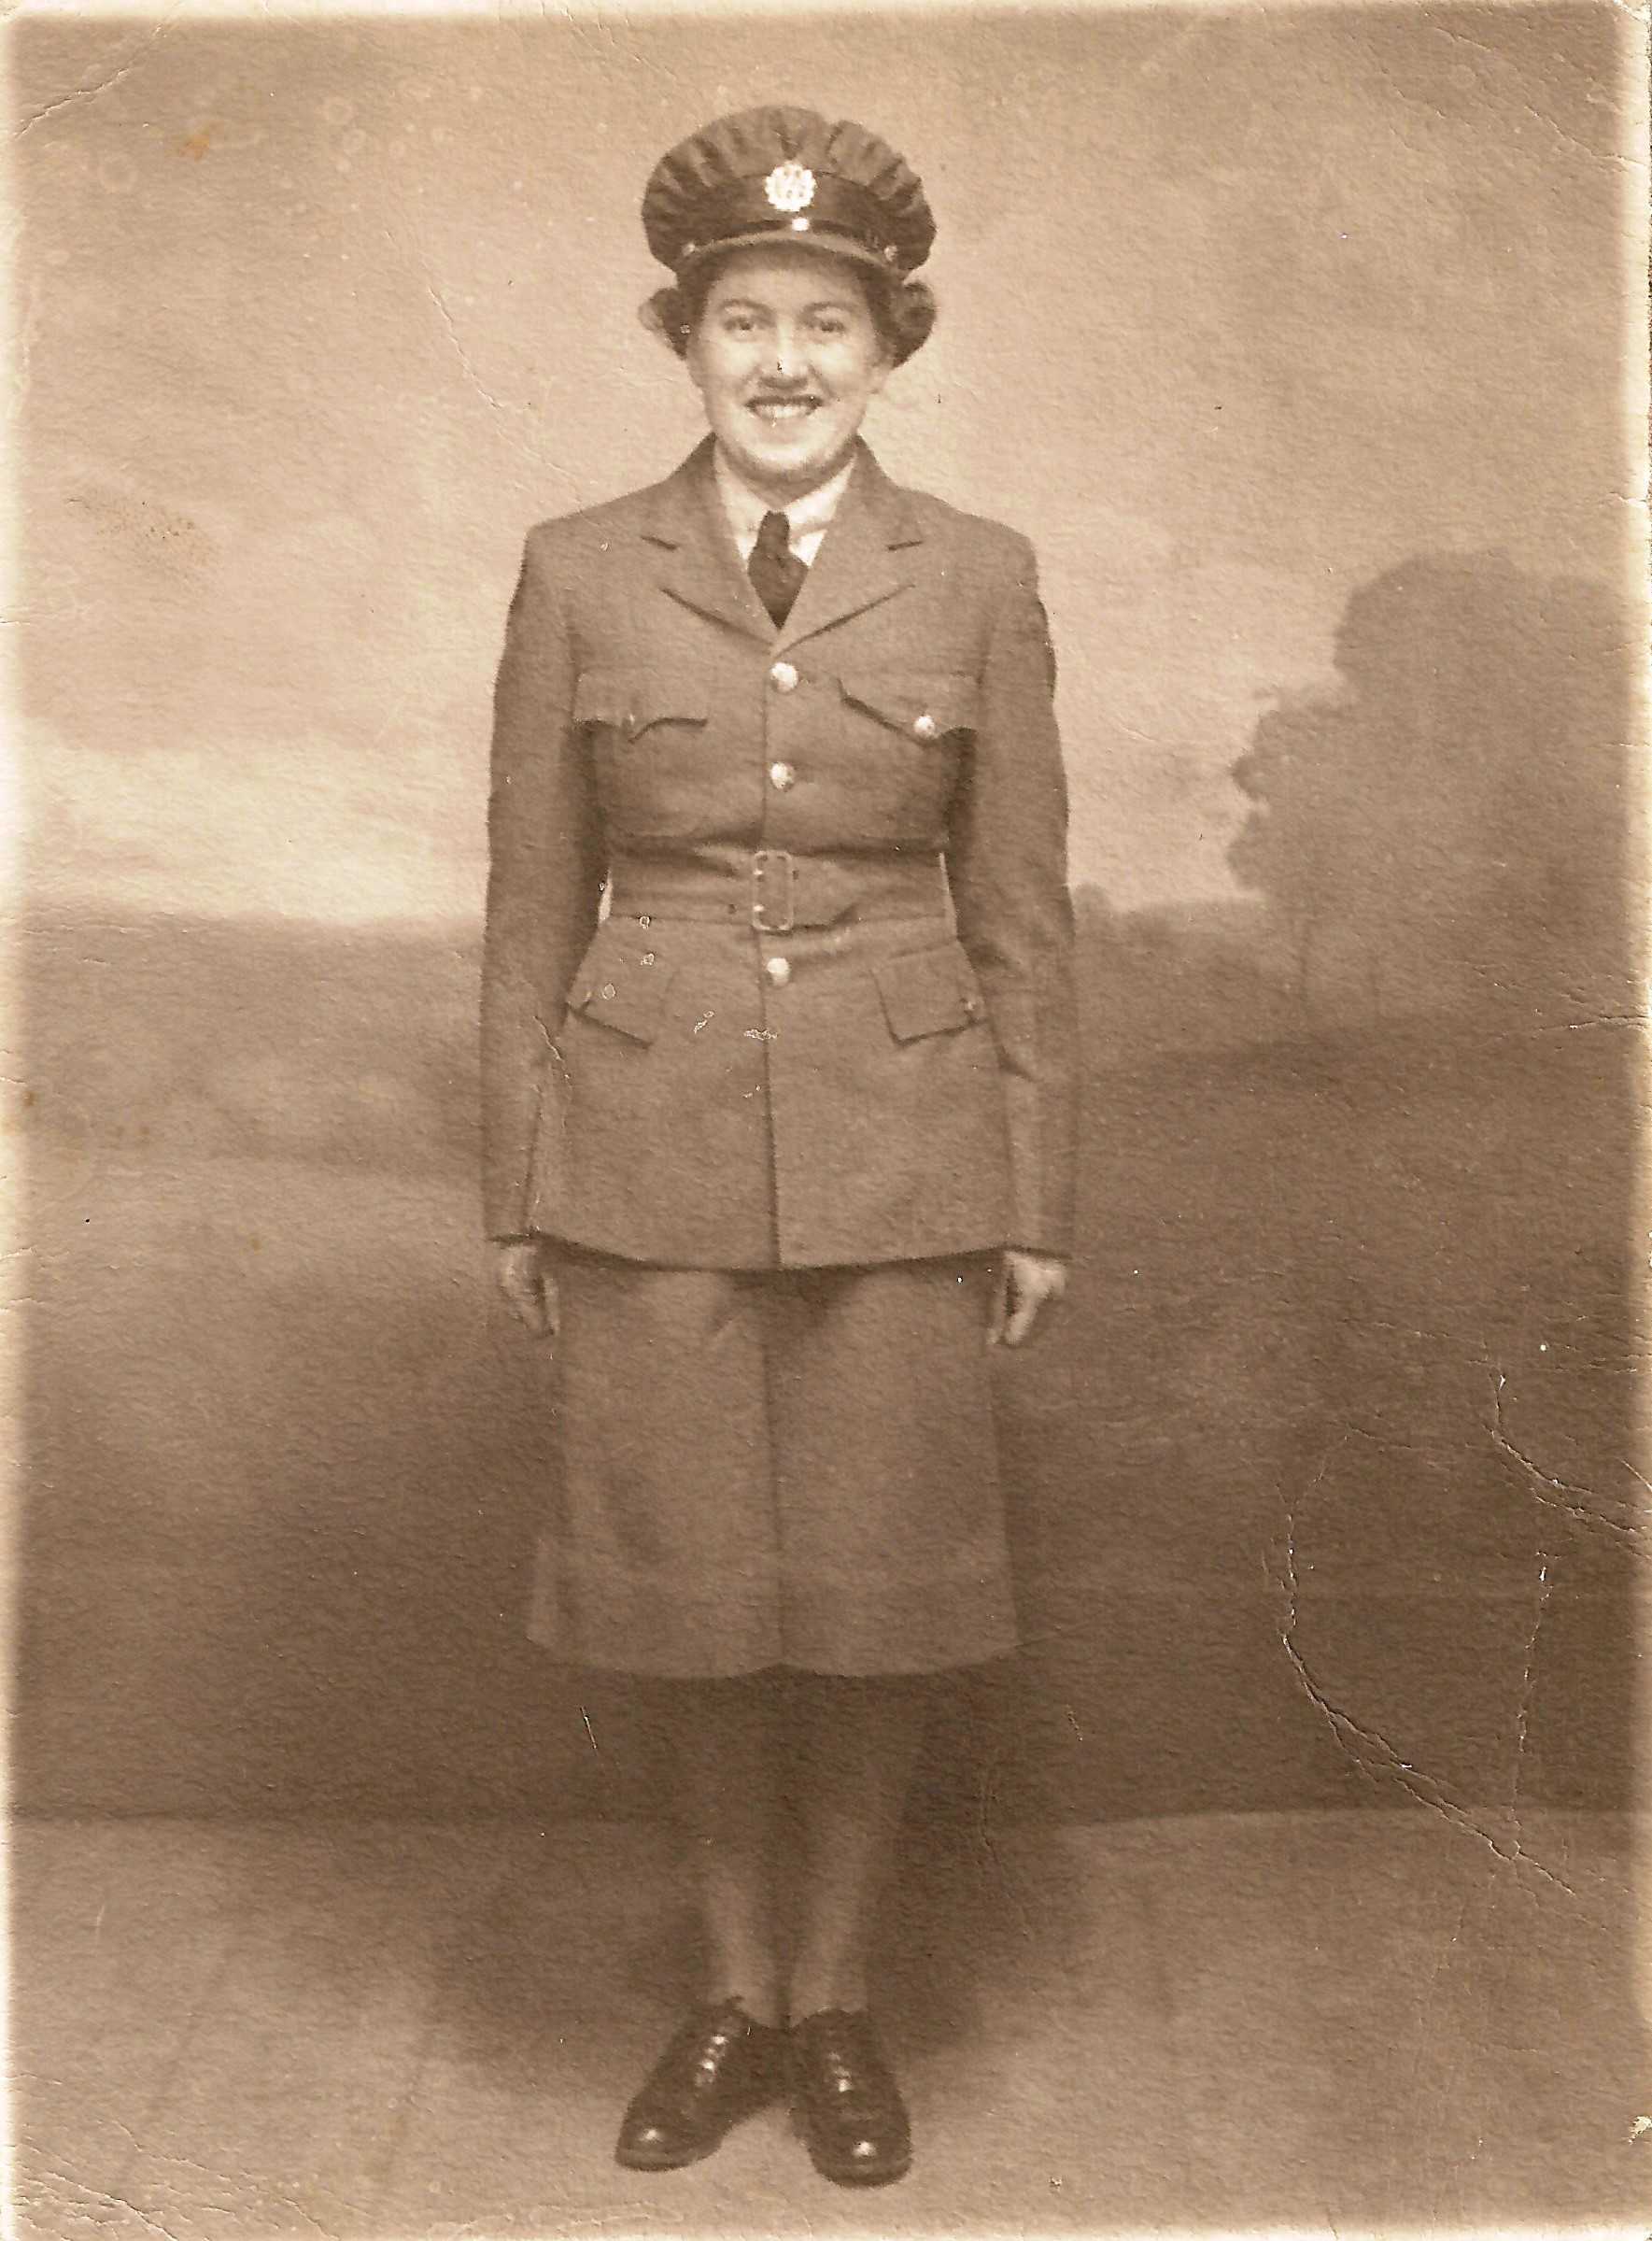 Sepia tone photo. A young women is shown in full military dress, in a skirt uniform. She is grinning standing at attention.